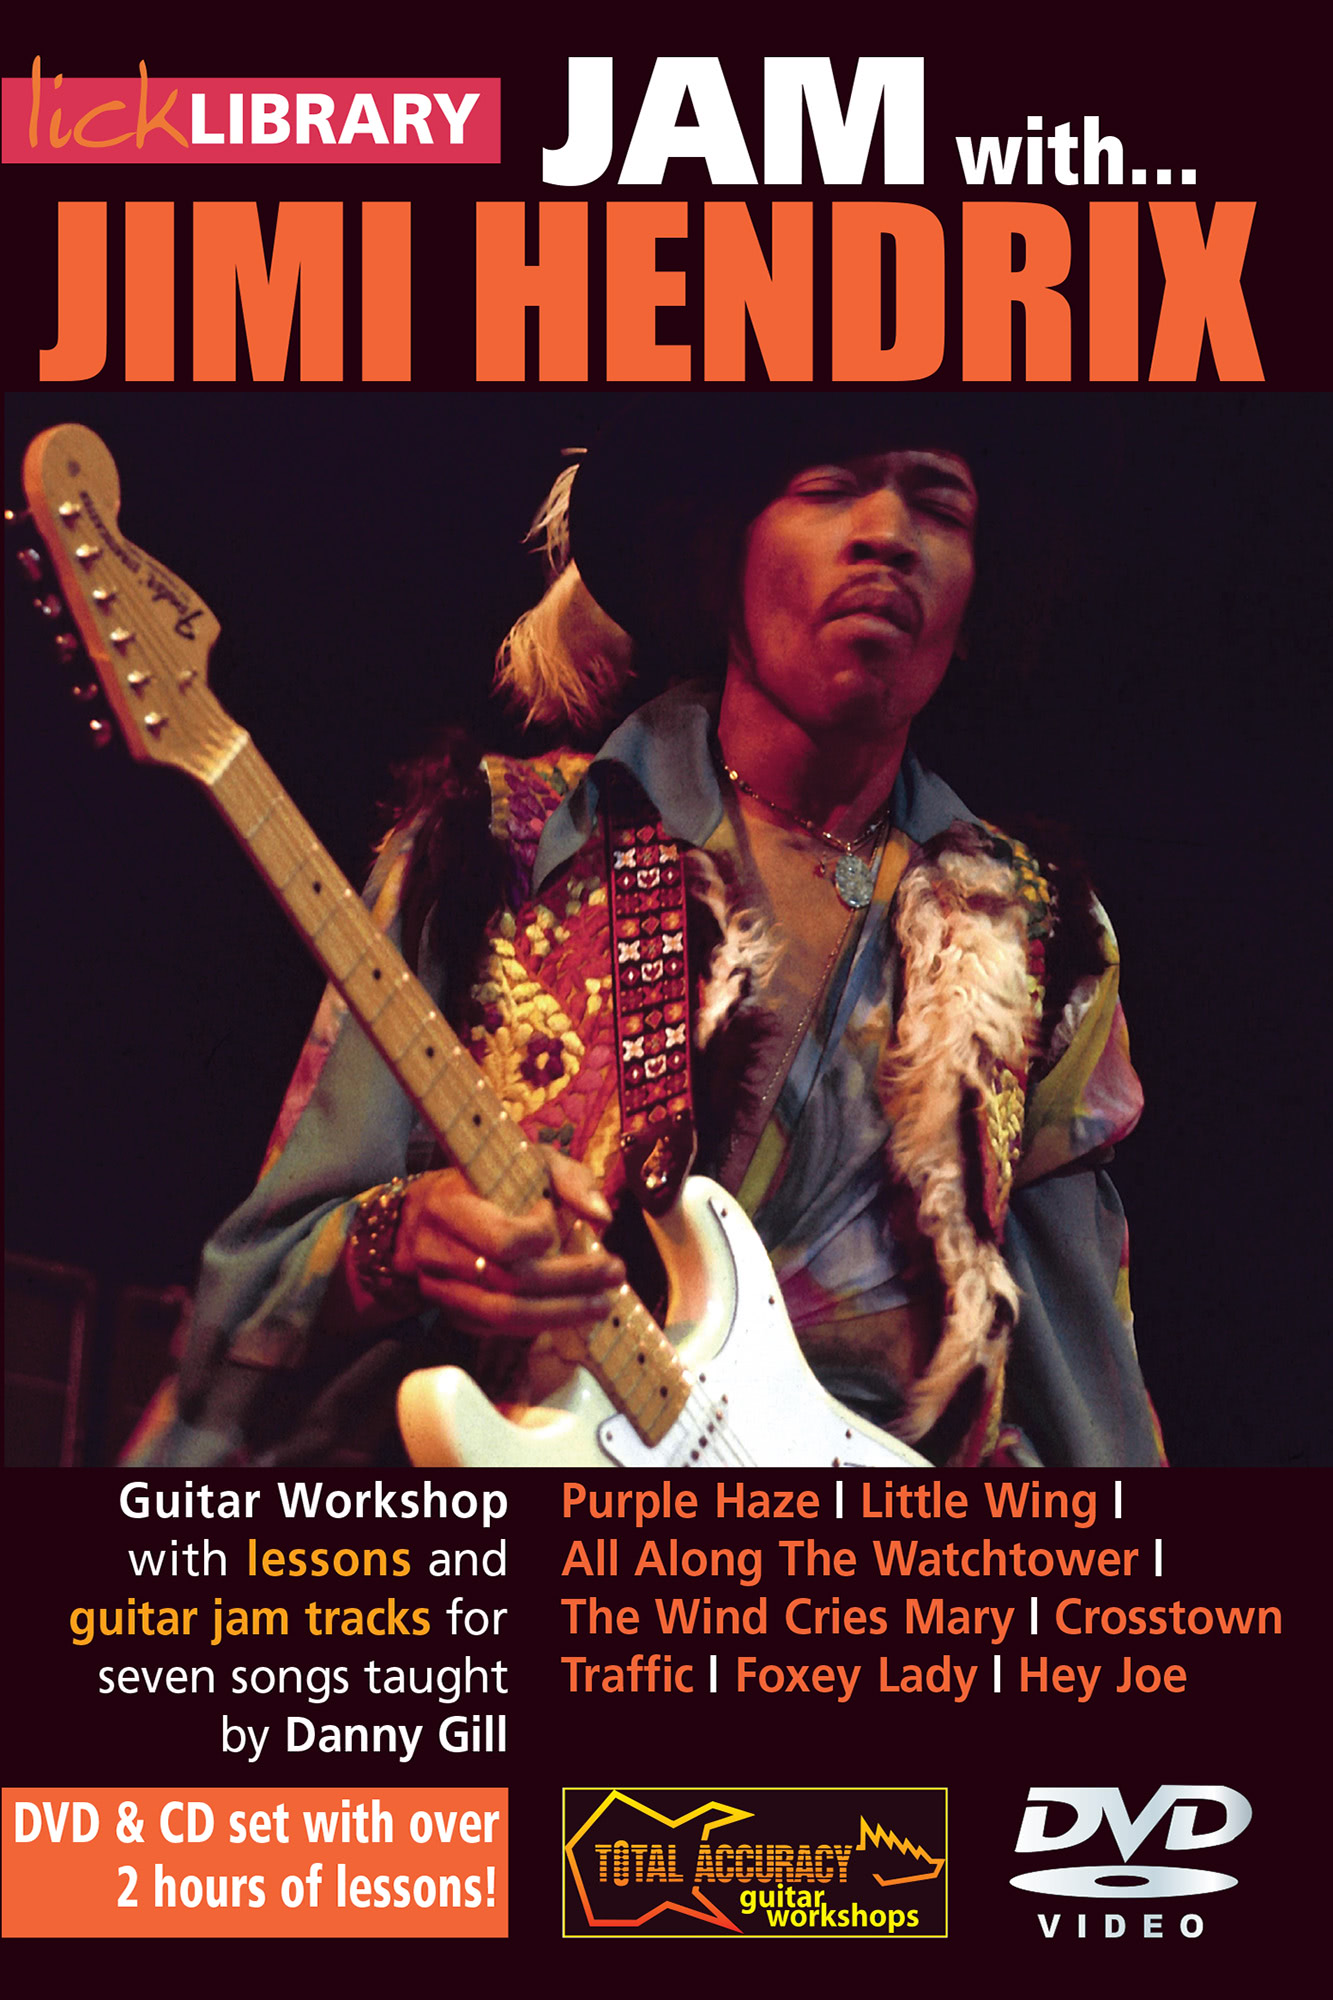 Jam with Jimi Hendrix & Danny Gill – Lick Library